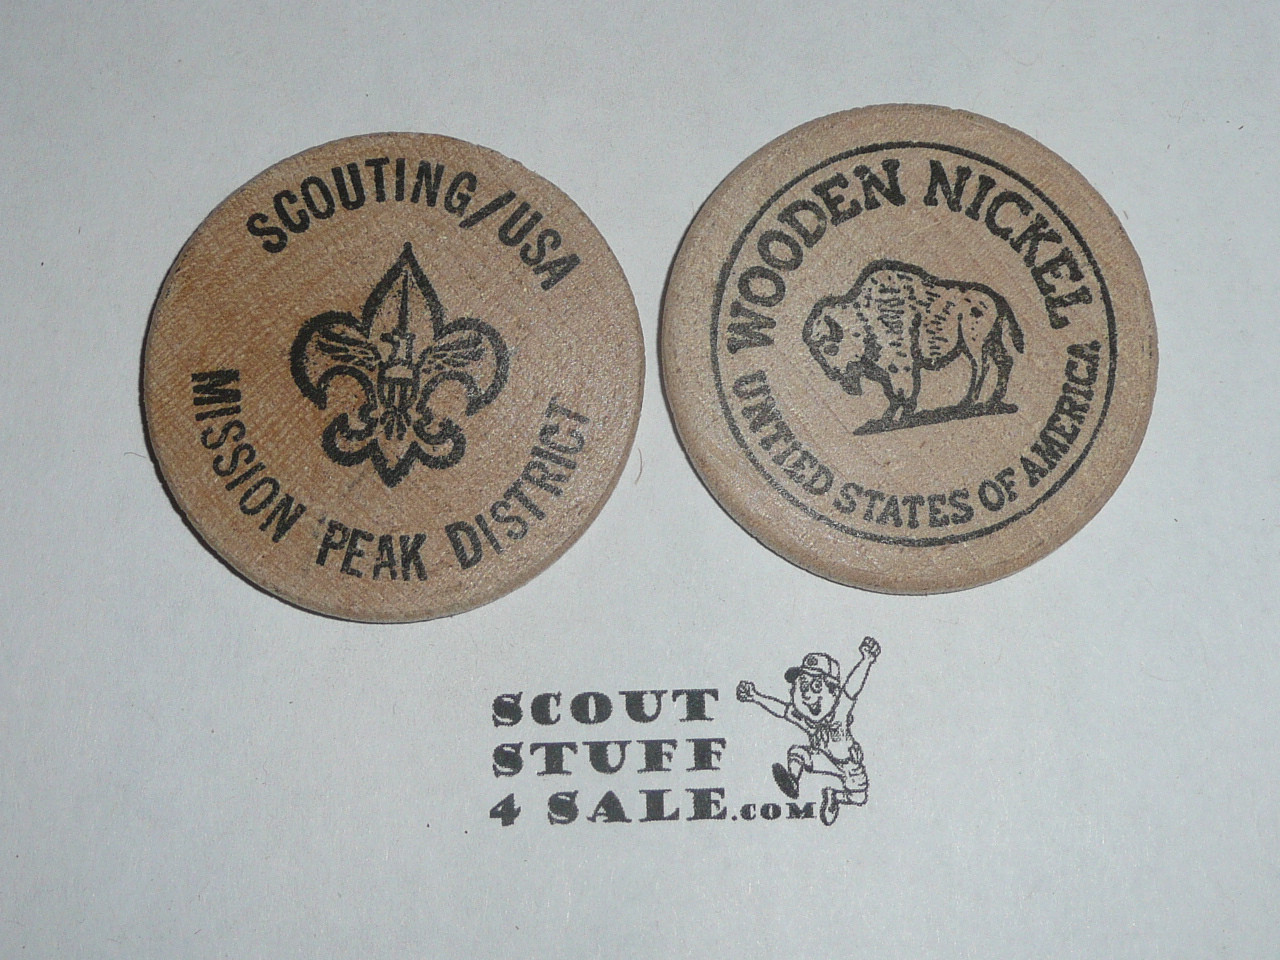 Scouting USA Mission Peak District Boy Scout Wooden Nickel